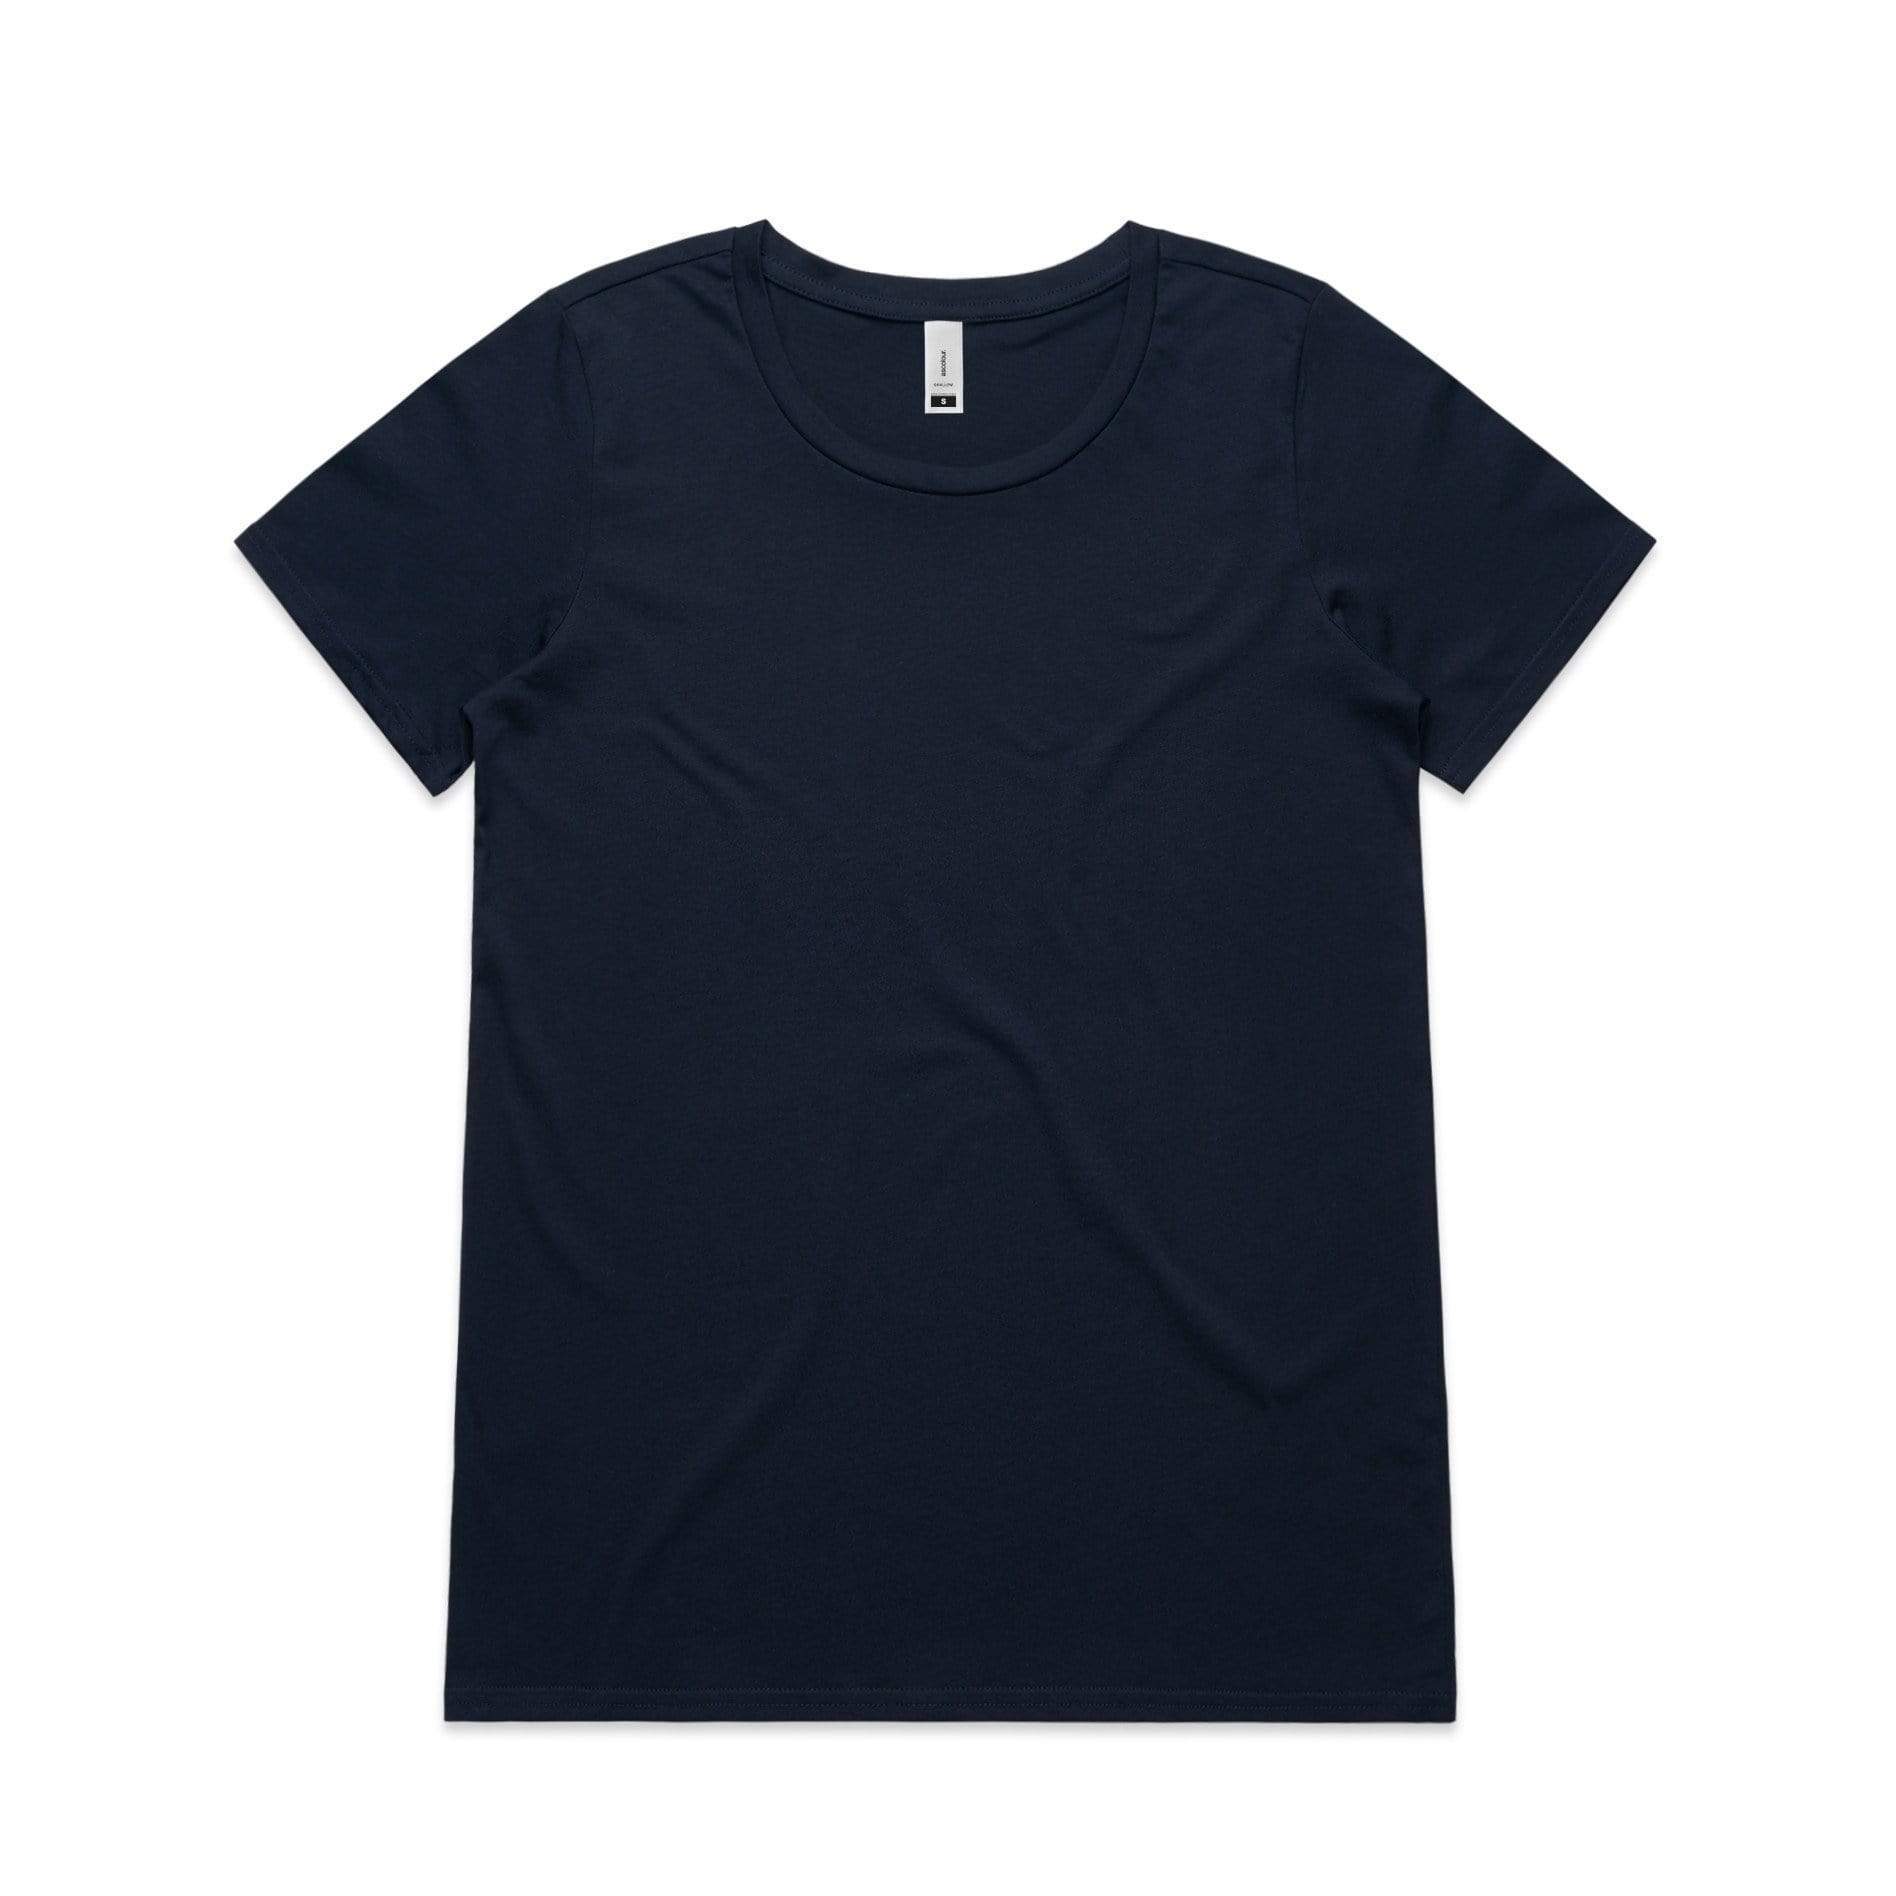 As Colour Casual Wear NAVY / XSM As Colour Women's shallow scoop tee 4011